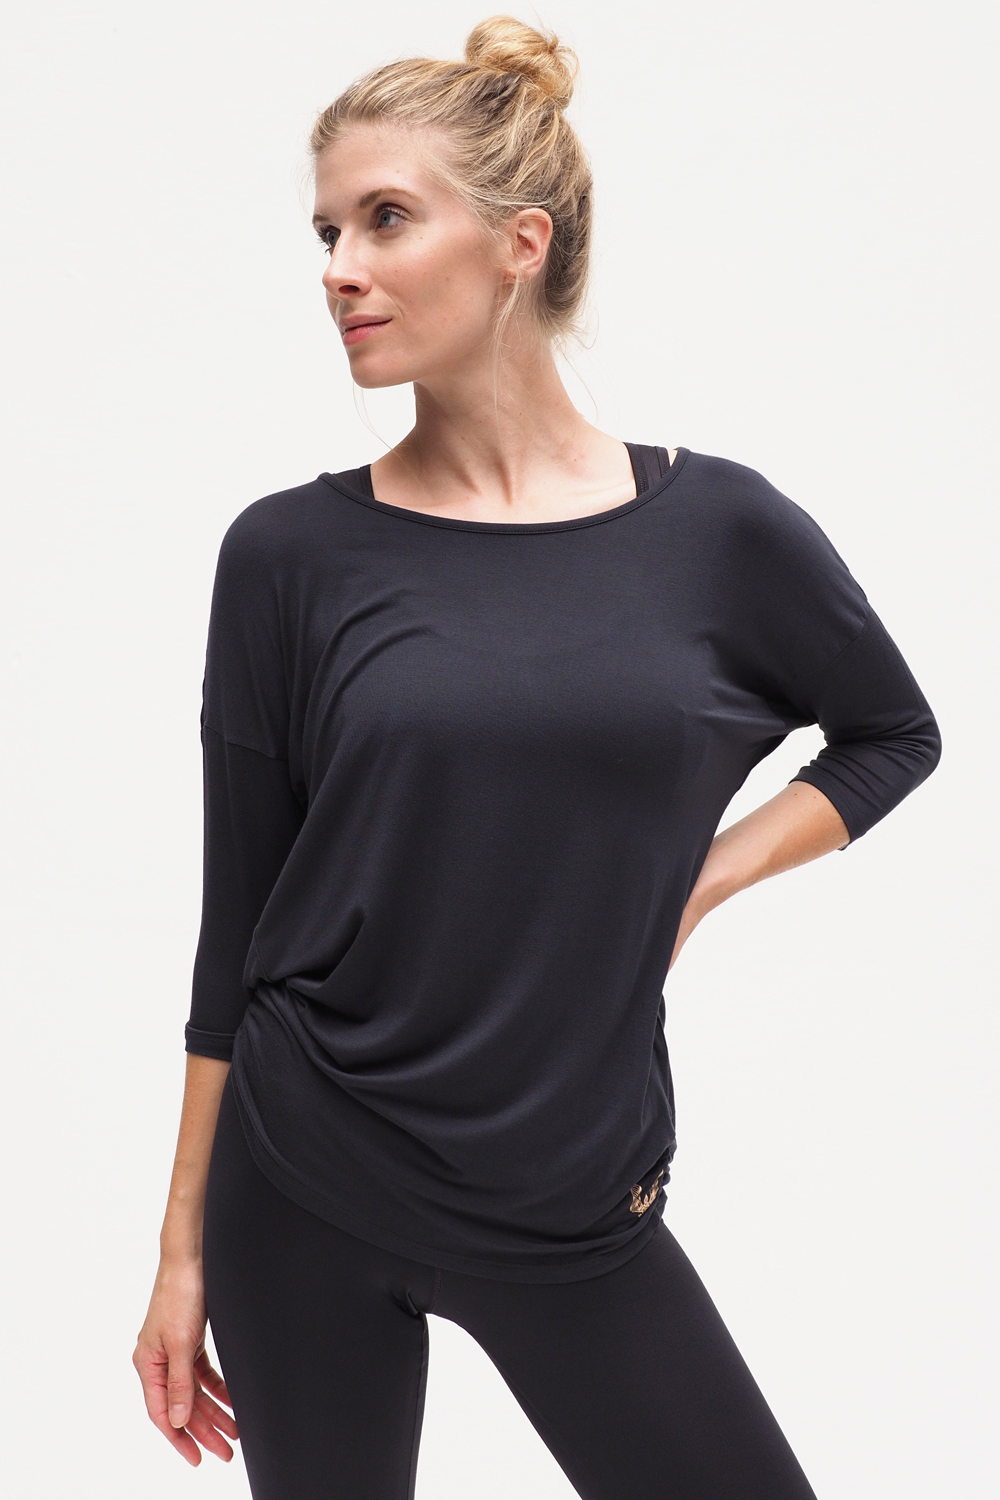 Shula Top anthracite_Kismet Yogastyle_front 2